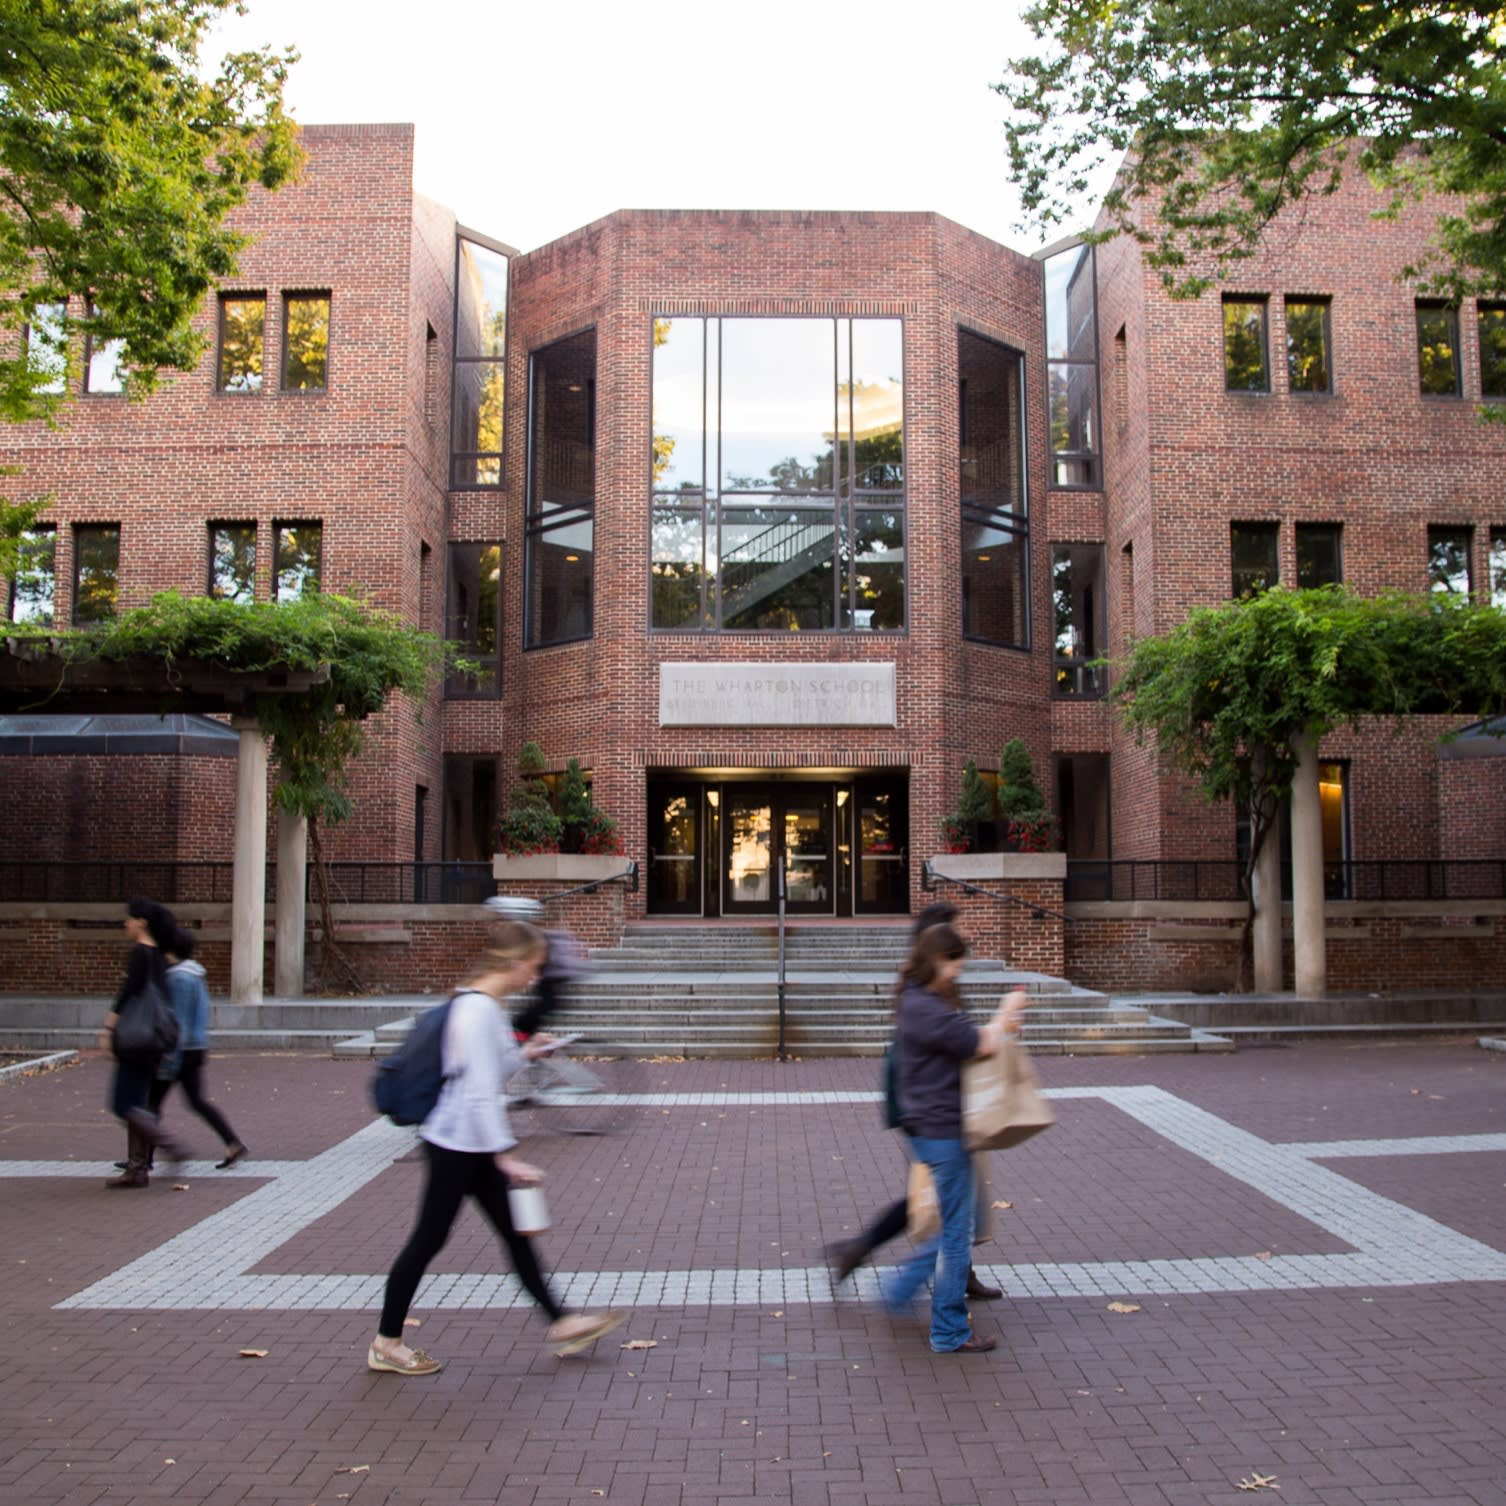 Wharton regains status as best business school for MBAs, according to FT ranking 